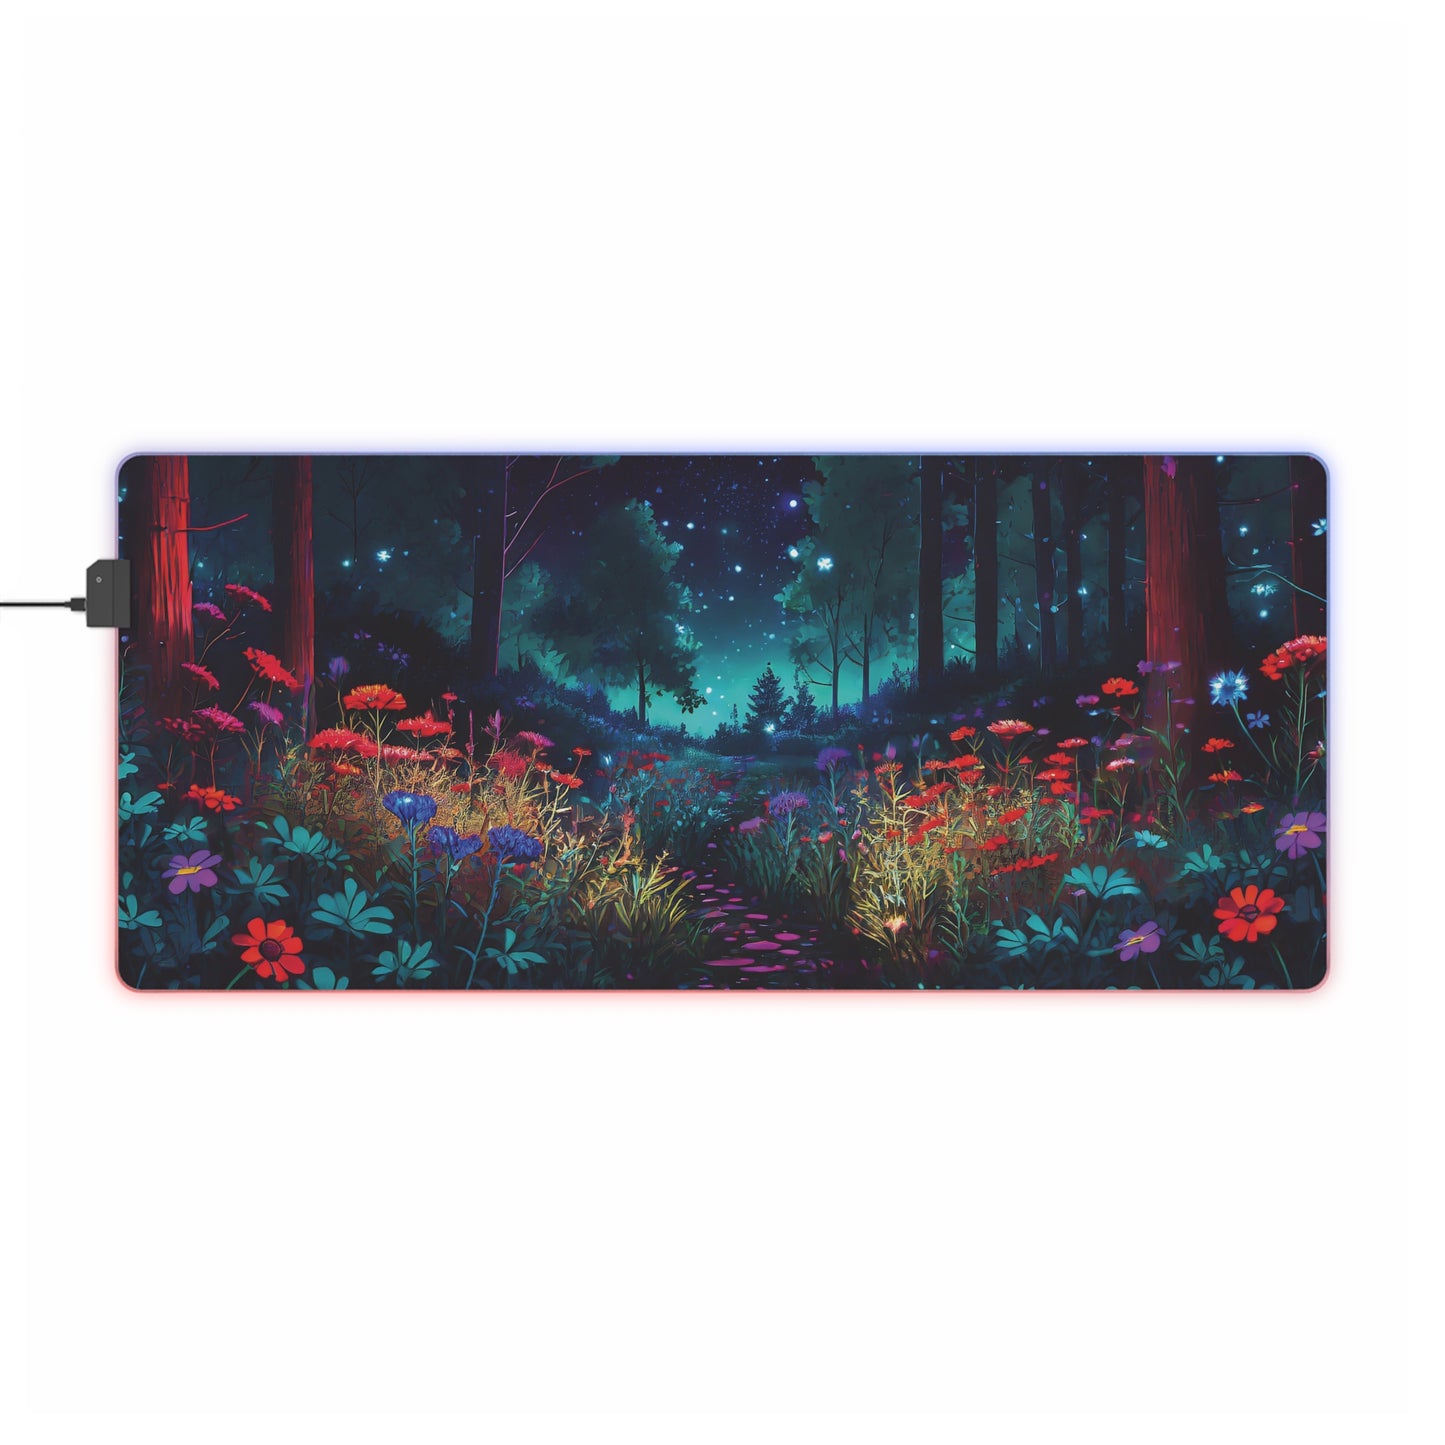 Gaming Desk Enchanted Forest Night Sky Large Gaming Mousepad, Starry Office Decor, Computer Accessory LED for Gamer Mouse Pad